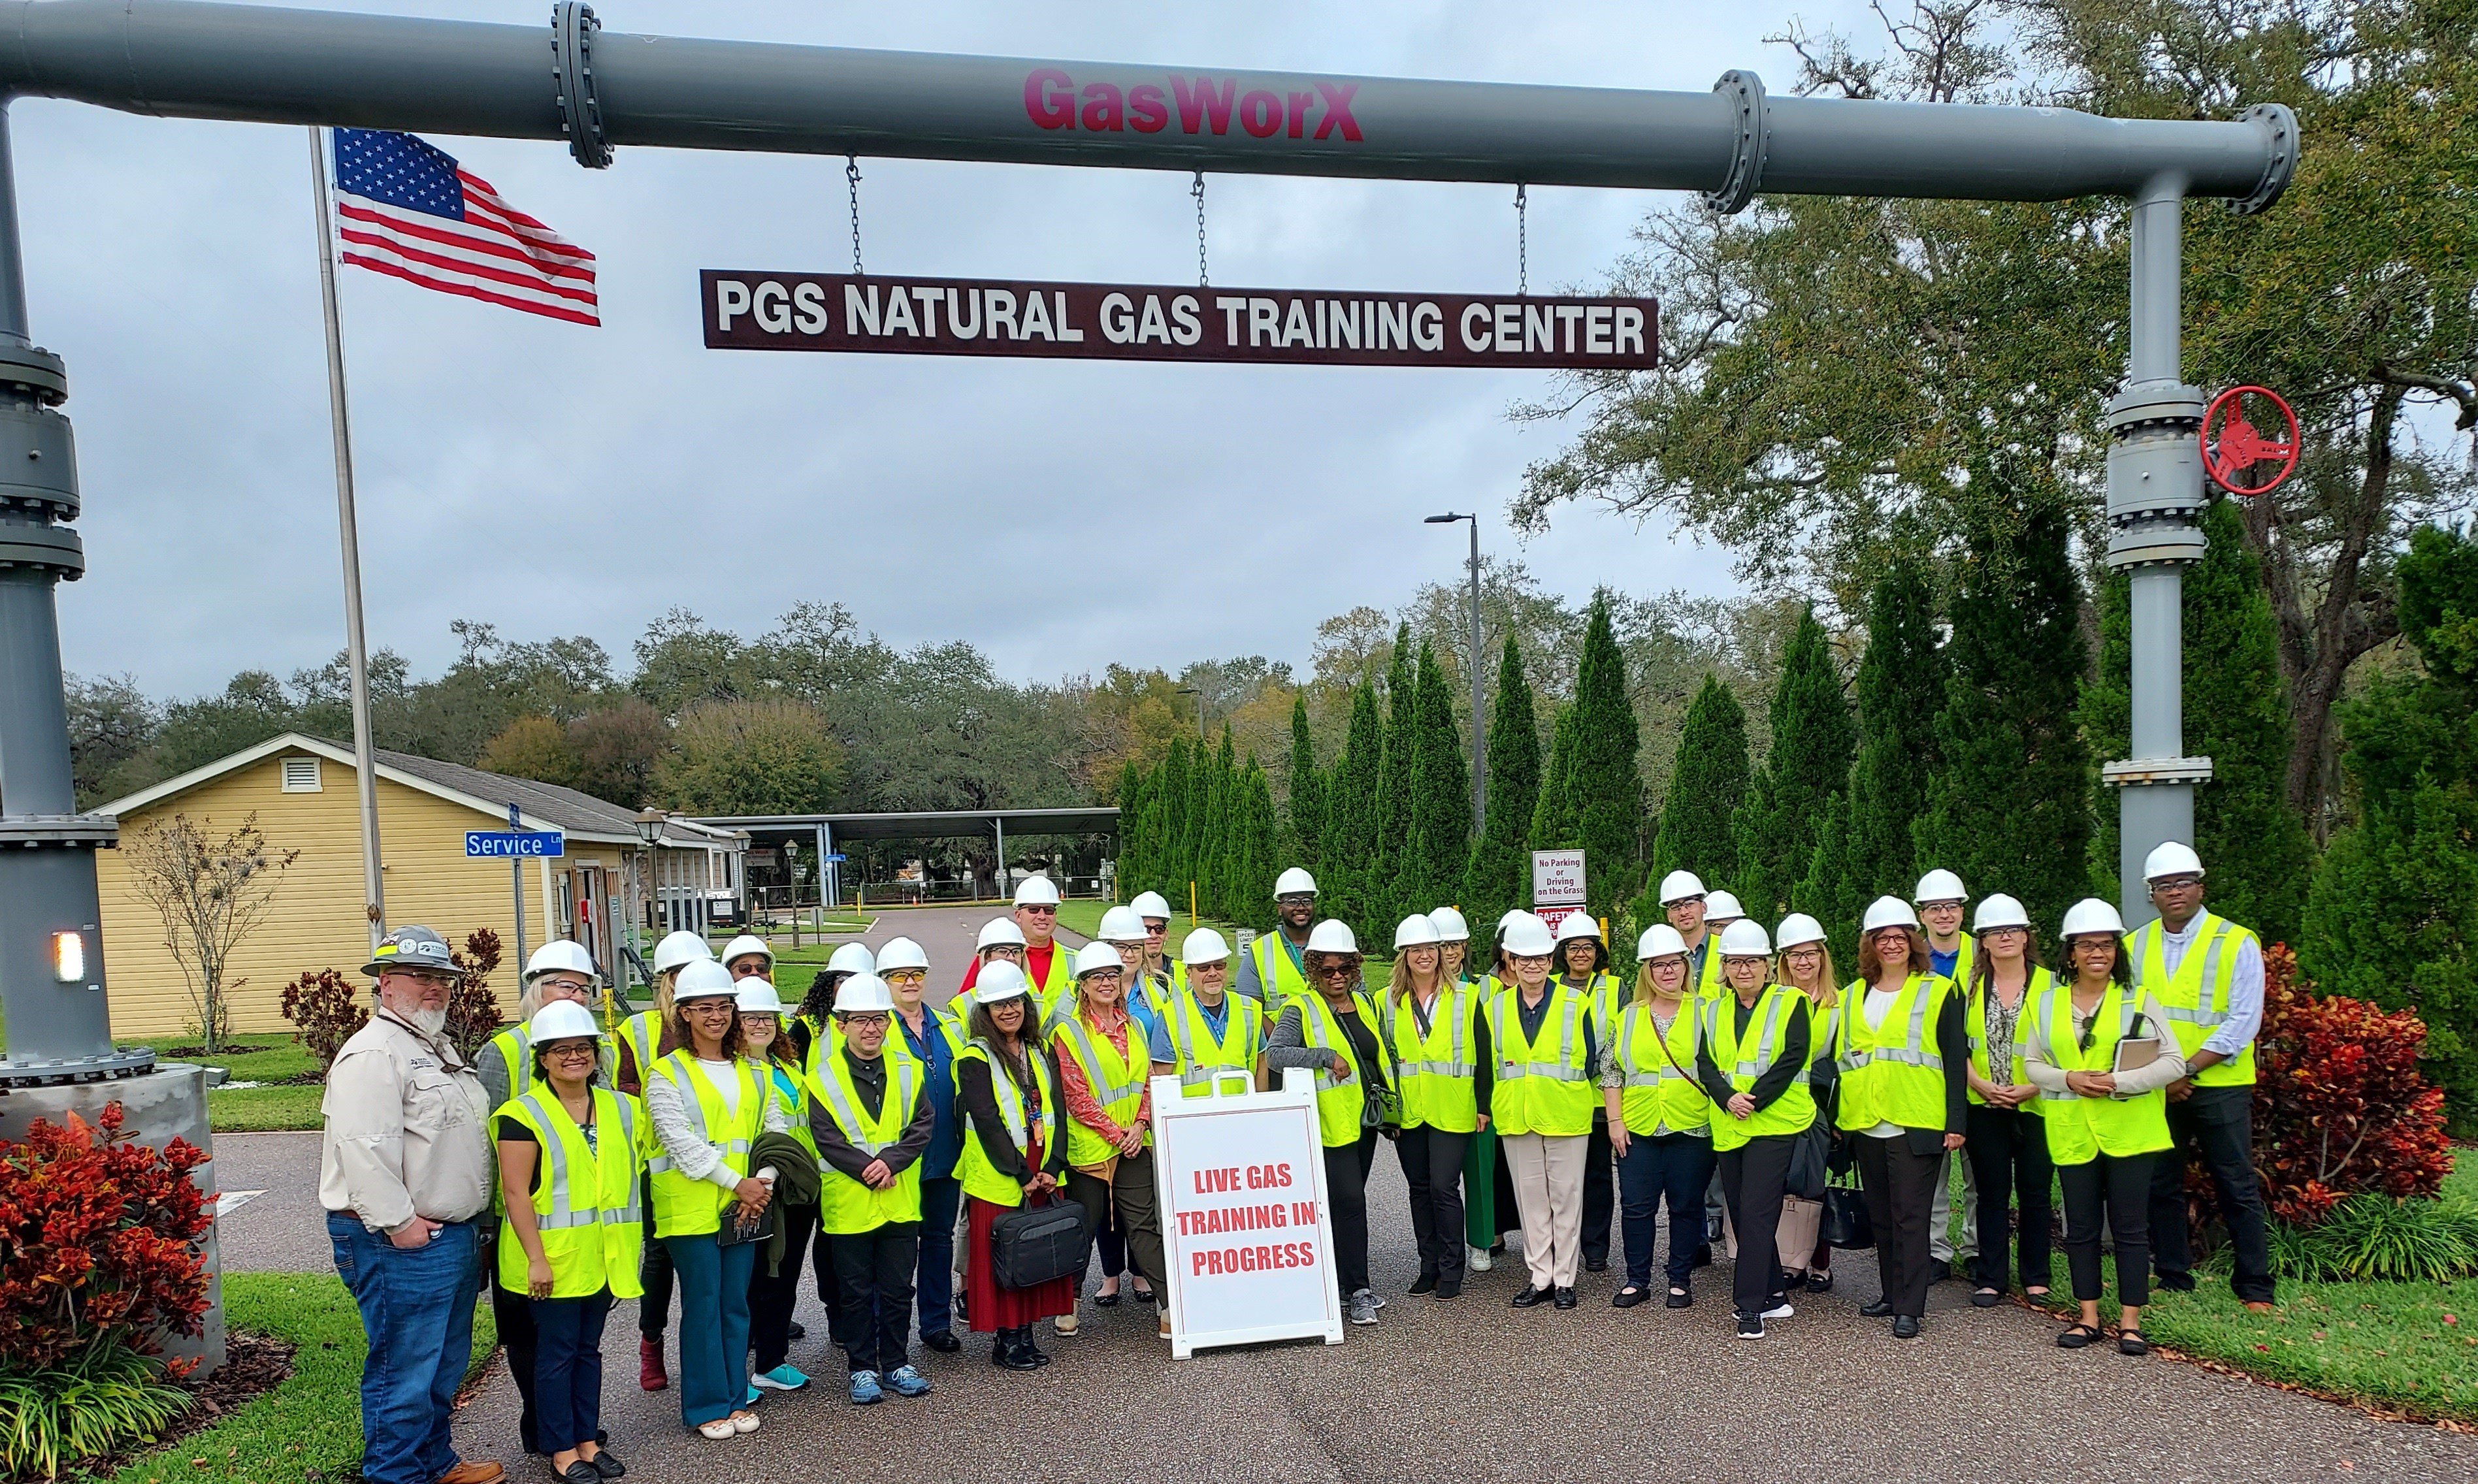 Peoples Gas Safety Programs Showcased in VA Tour